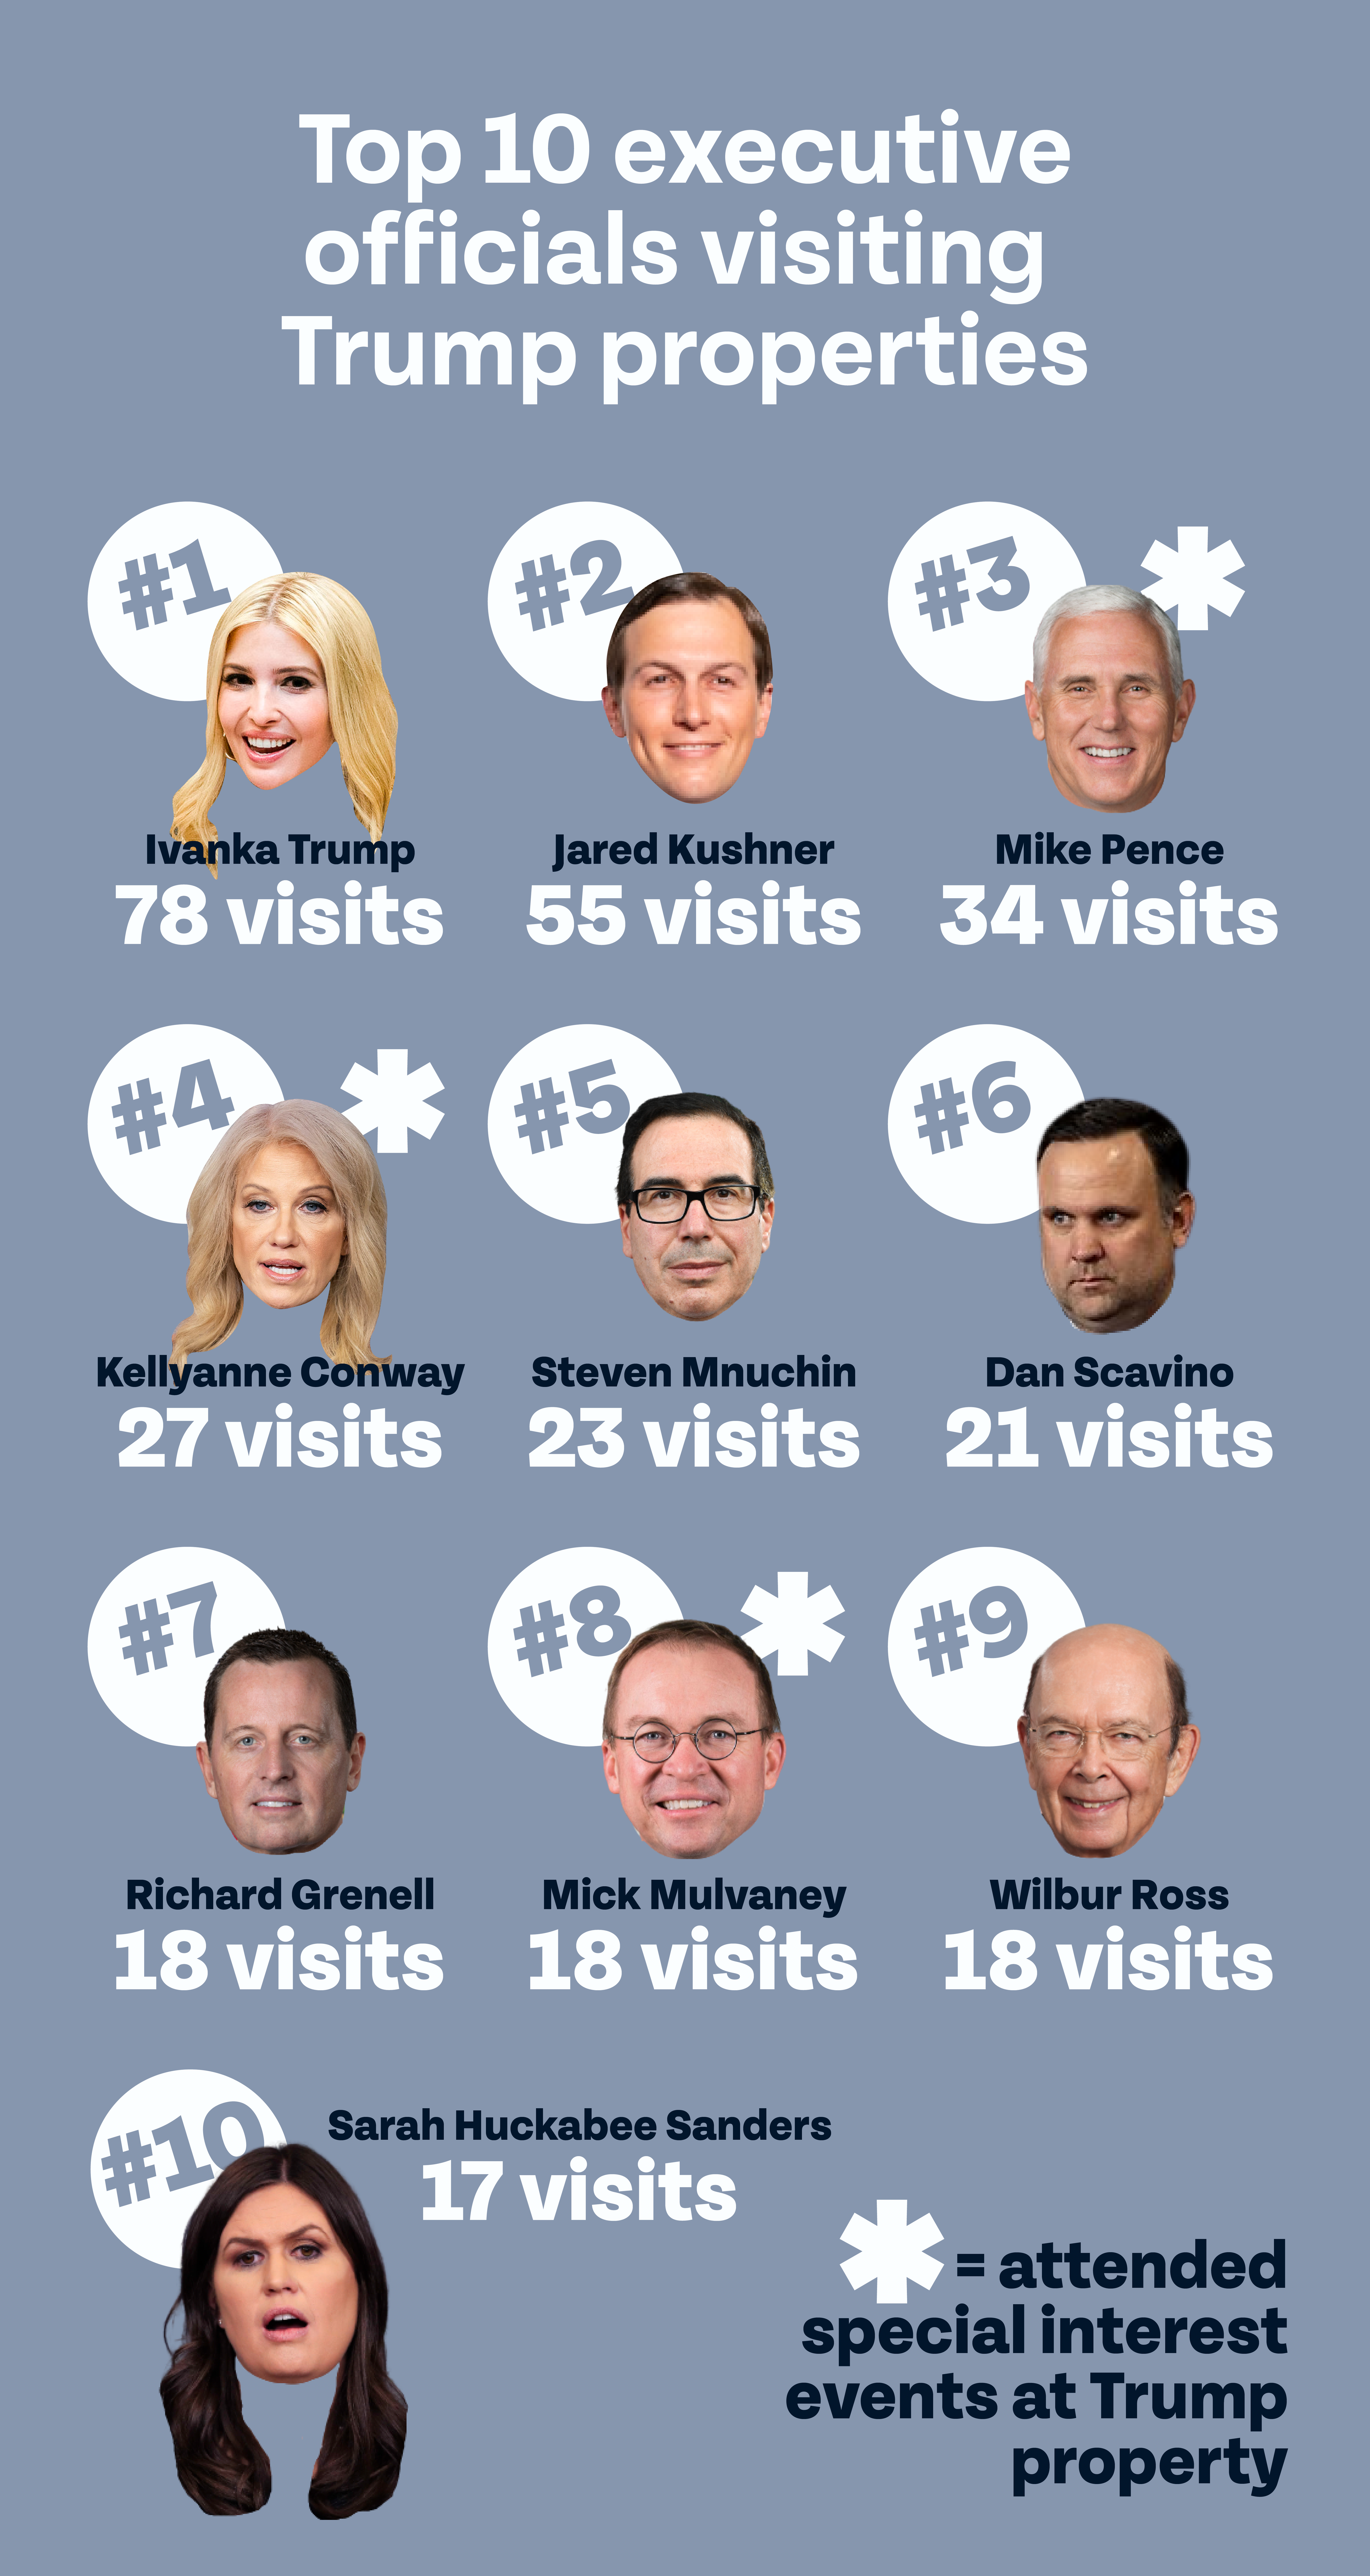 Title: “Top 10 executive officials visiting Trump properties”. Each name has an image of the officials’ face next to it: “#1 Ivanka Trump, 78 visits; #2 Jared Kushner, 55 visits; #3 Mike Pence: 33 visits*; Kellyanne Conway, 27 visits*; Steven Mnuchin, 23 visits; Dan Scavino, 21 visits; Richard Grenell, 18 visits; Mick Mulvaney, 18 visits*; Wilbur Ross, 18 visits; Sarah Huckabee Sanders, 17 visits; * = attended special interest events at Trump property"